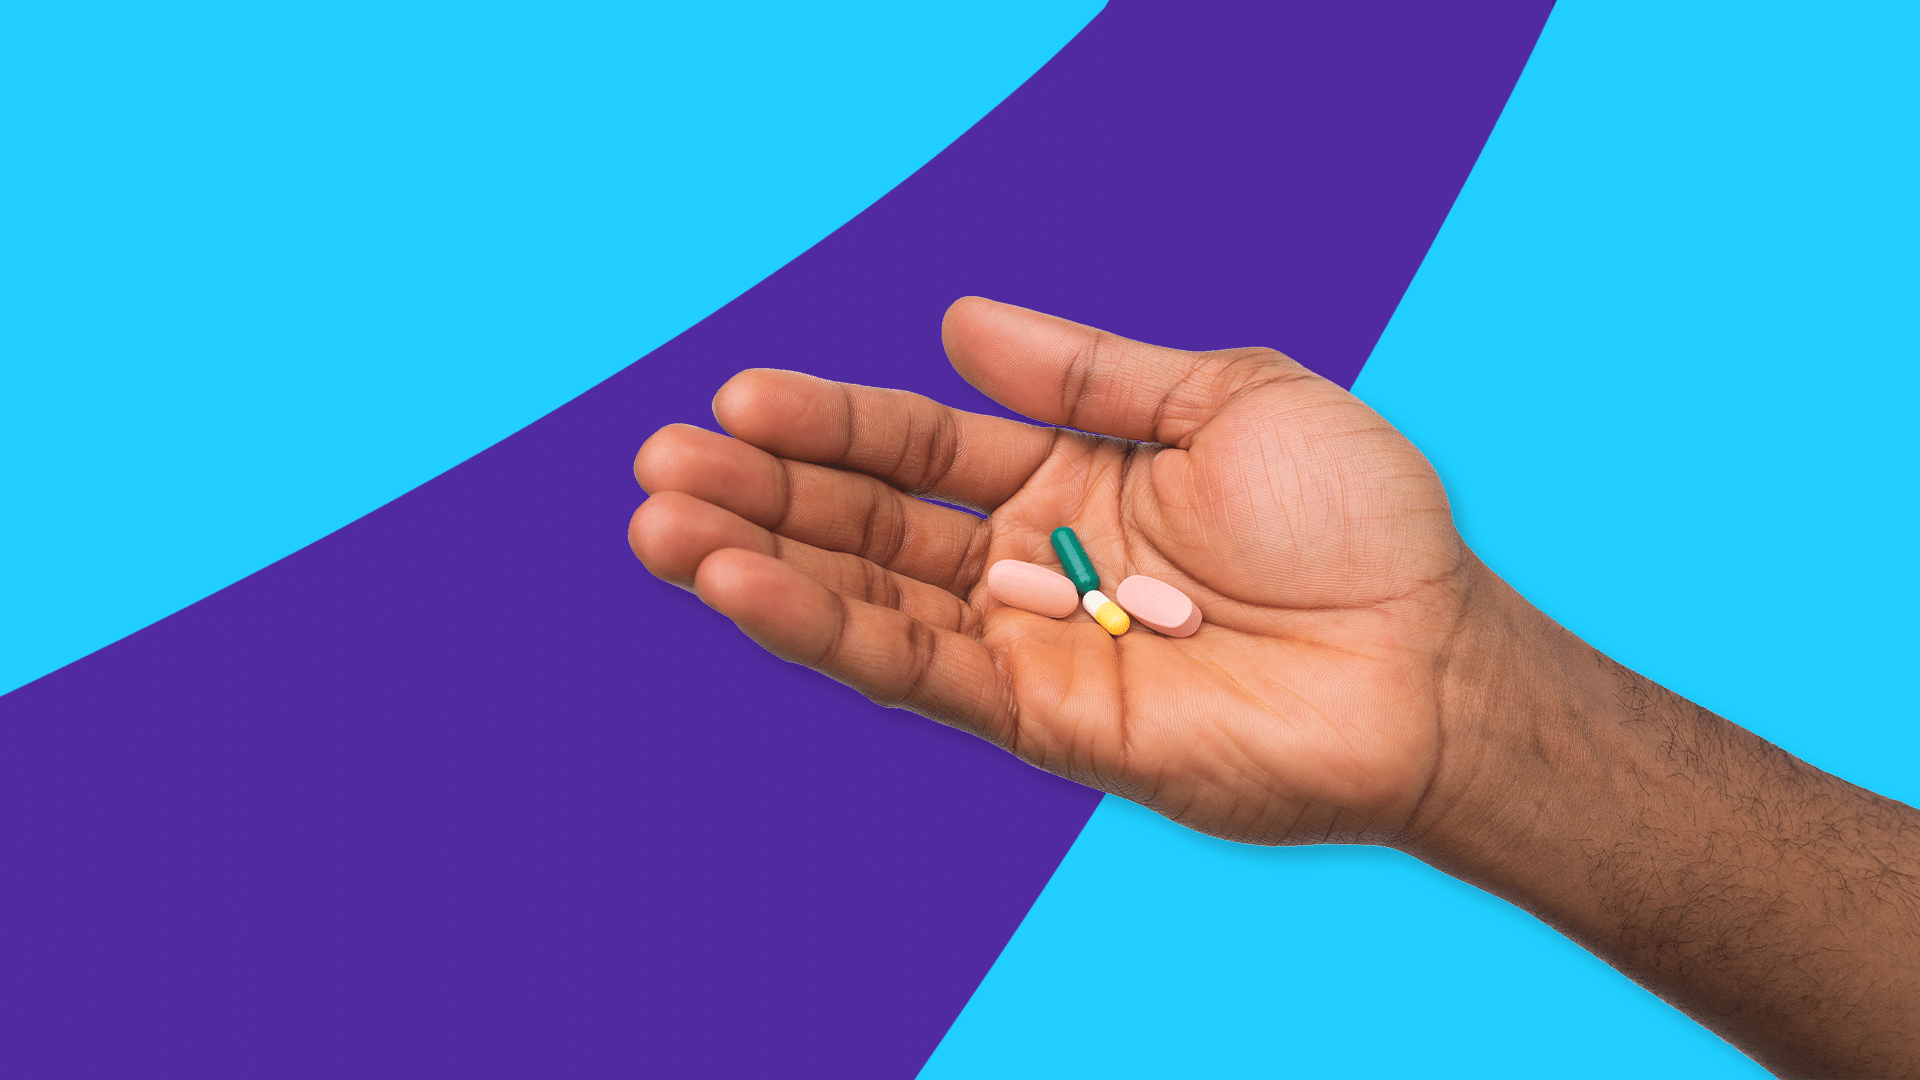 Hand holding a variety of pills: What can I take instead of Bystolic?